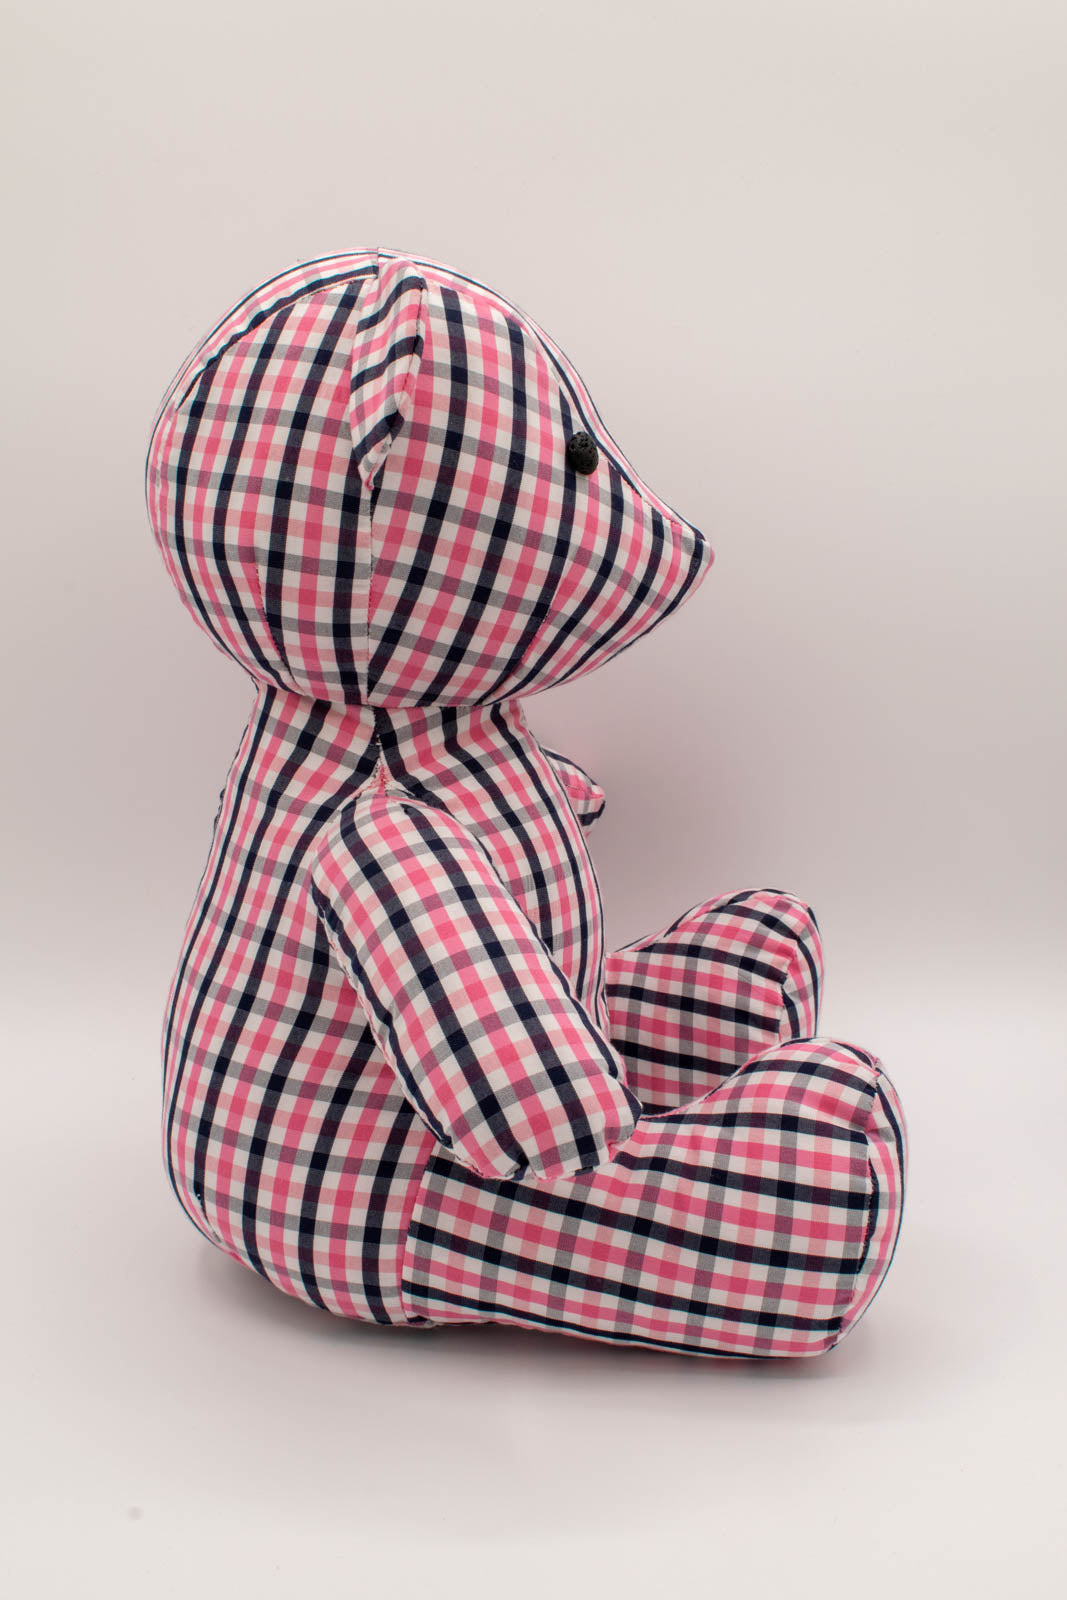 Blue and Pink Gingham Shirt Teddy Bear 6